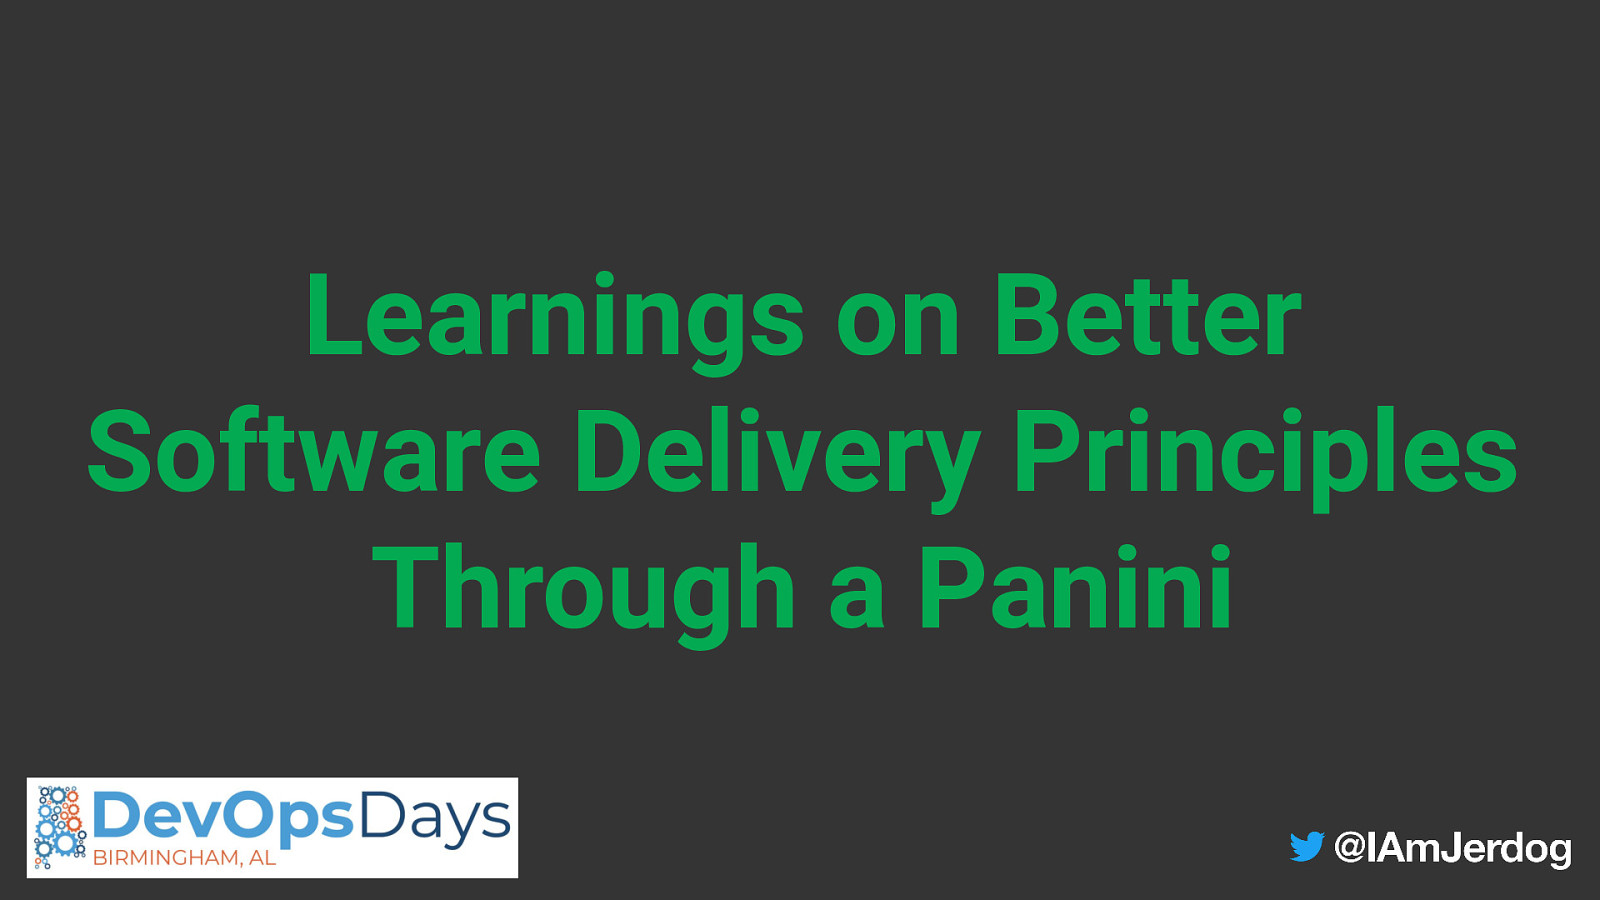 Things we’ve learned about better software delivery principles through a panini